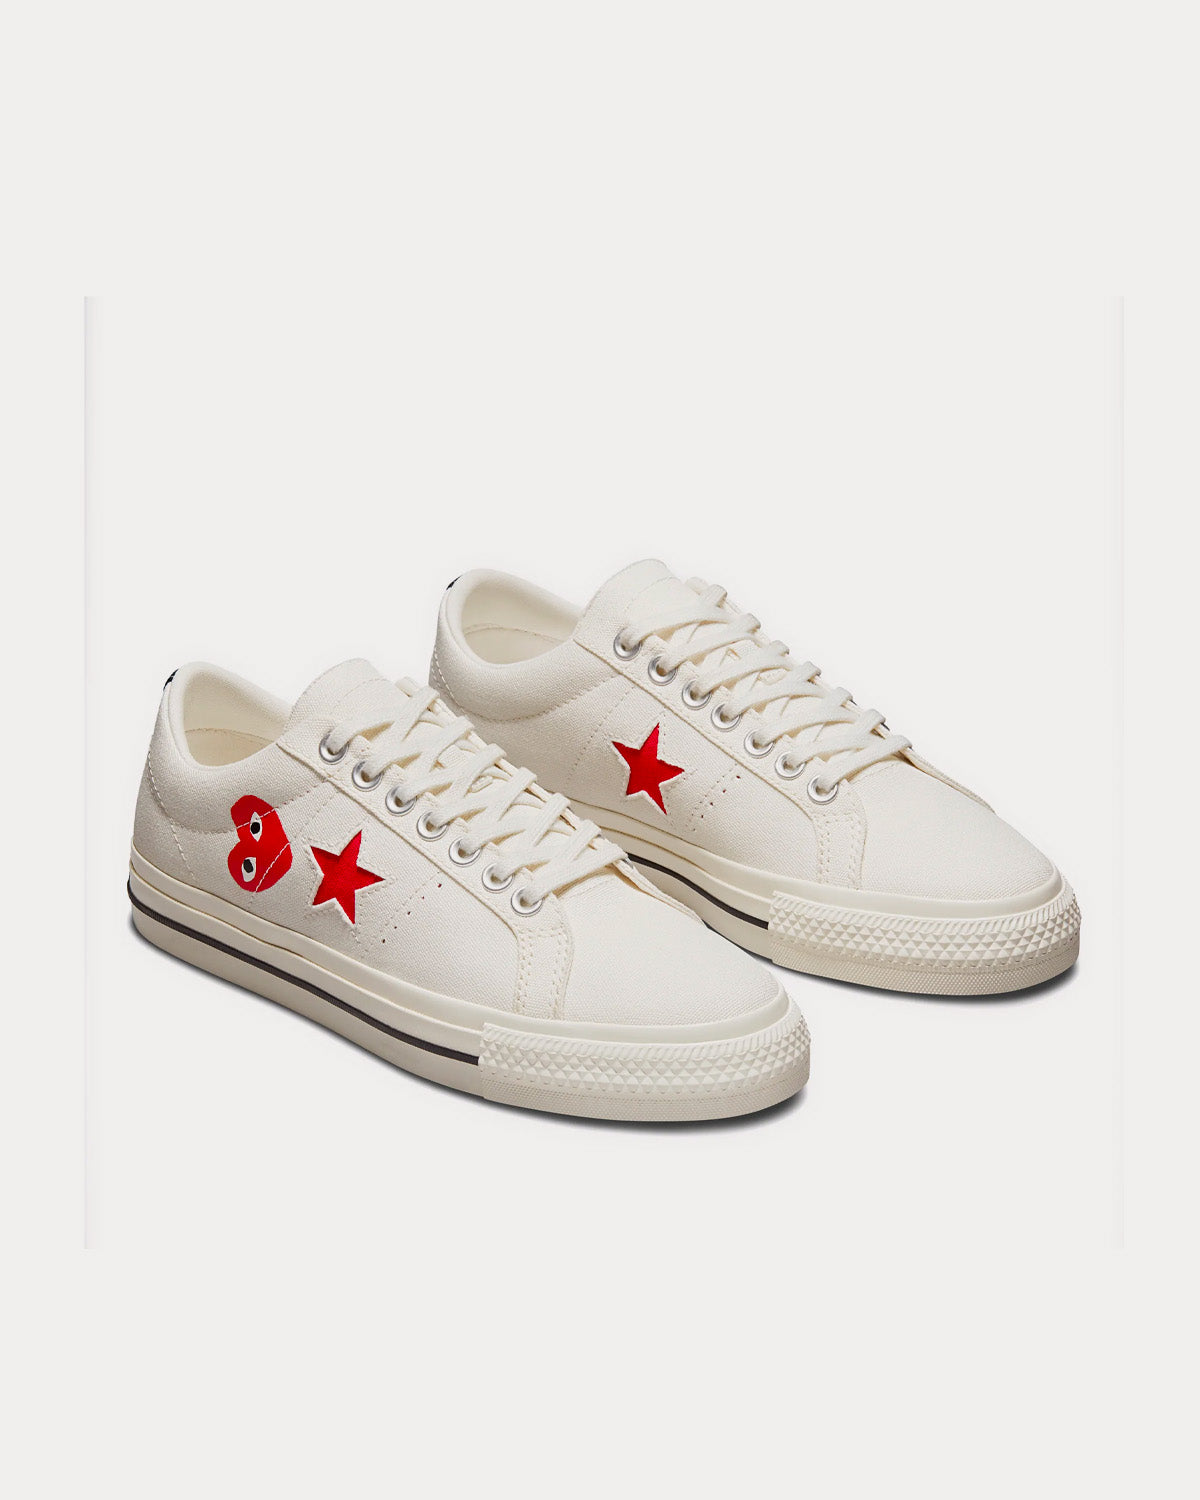 Converse x Comme des Garçons PLAY - One Star Red Heart White Low Top Sneakers